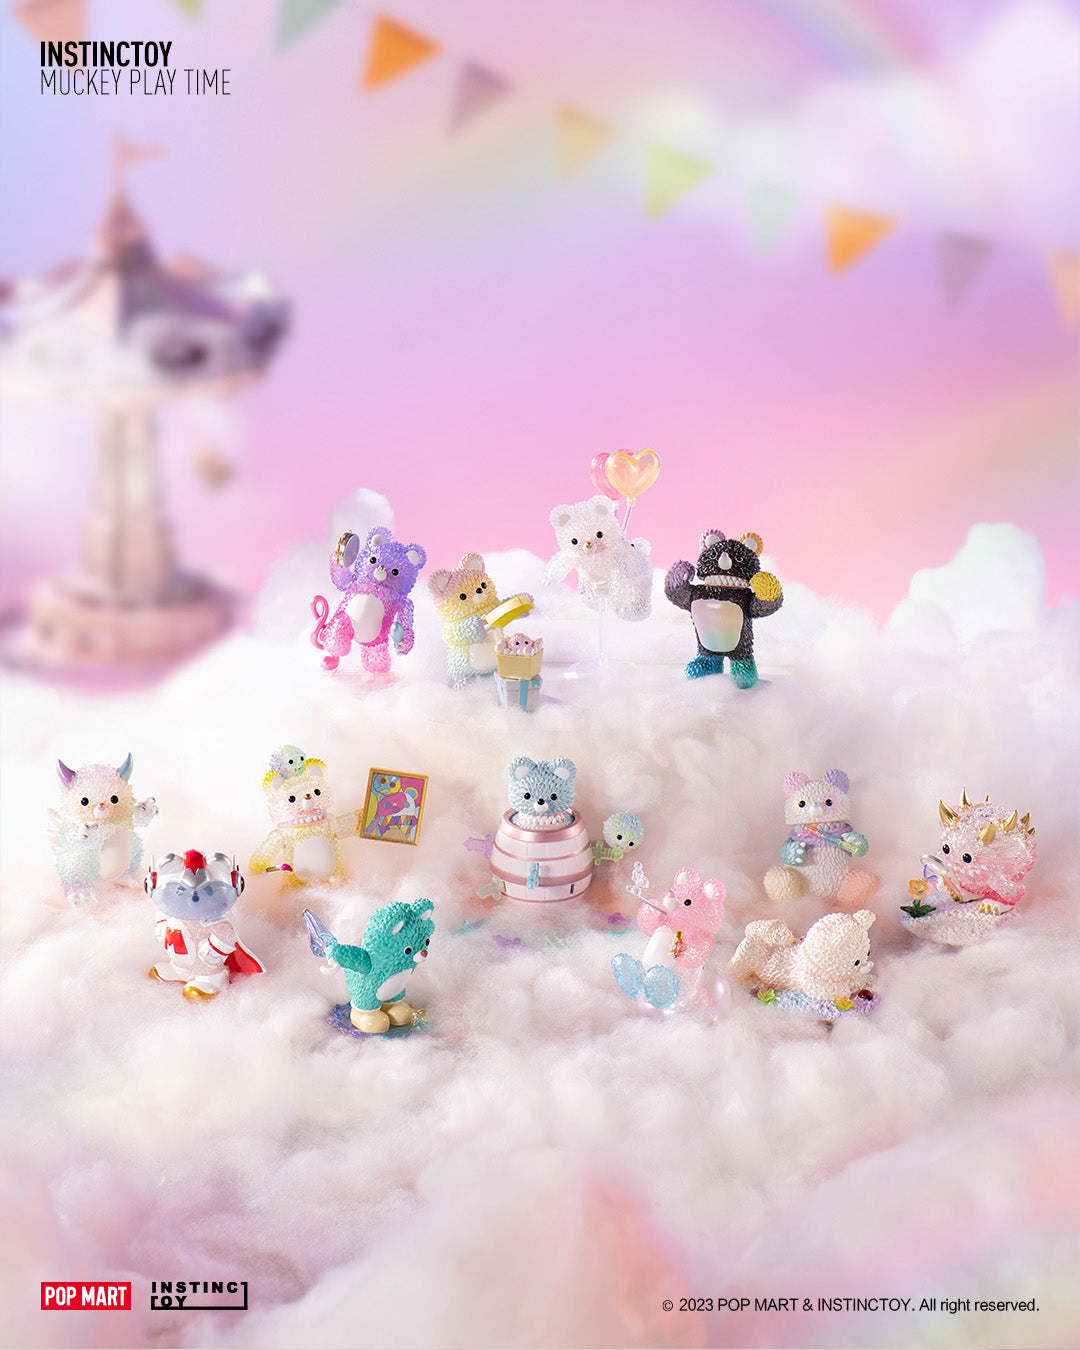 Muckey Play Time Blind Box Series by Instinctoy